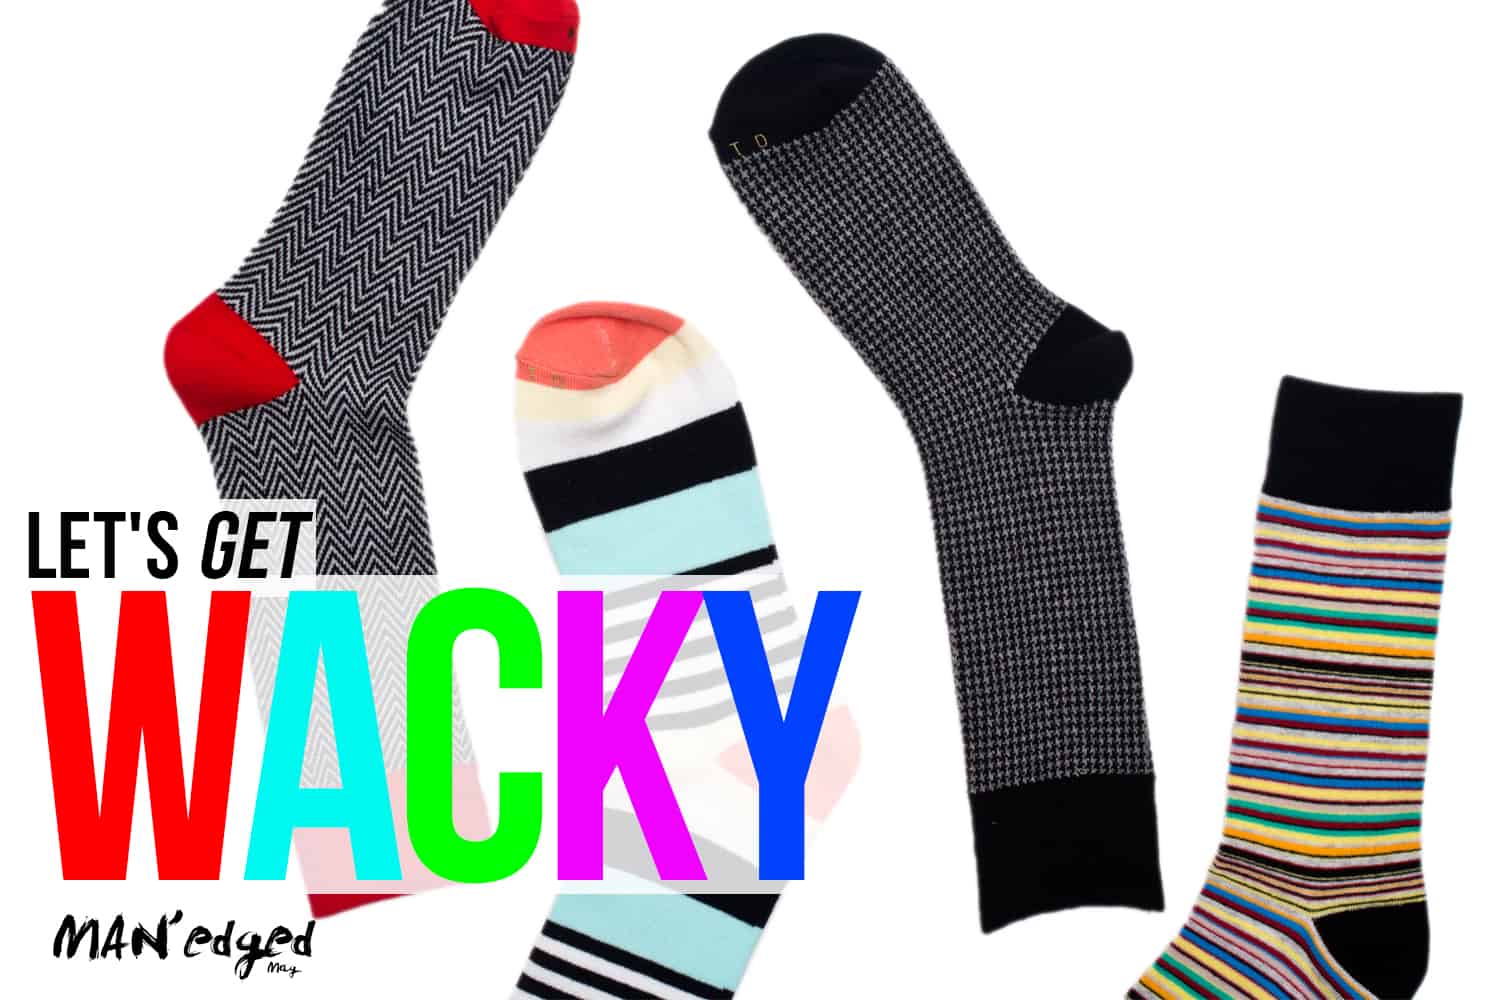 four bold colored and heavily patterned socks, image title let's get wacky, man'edged magazine